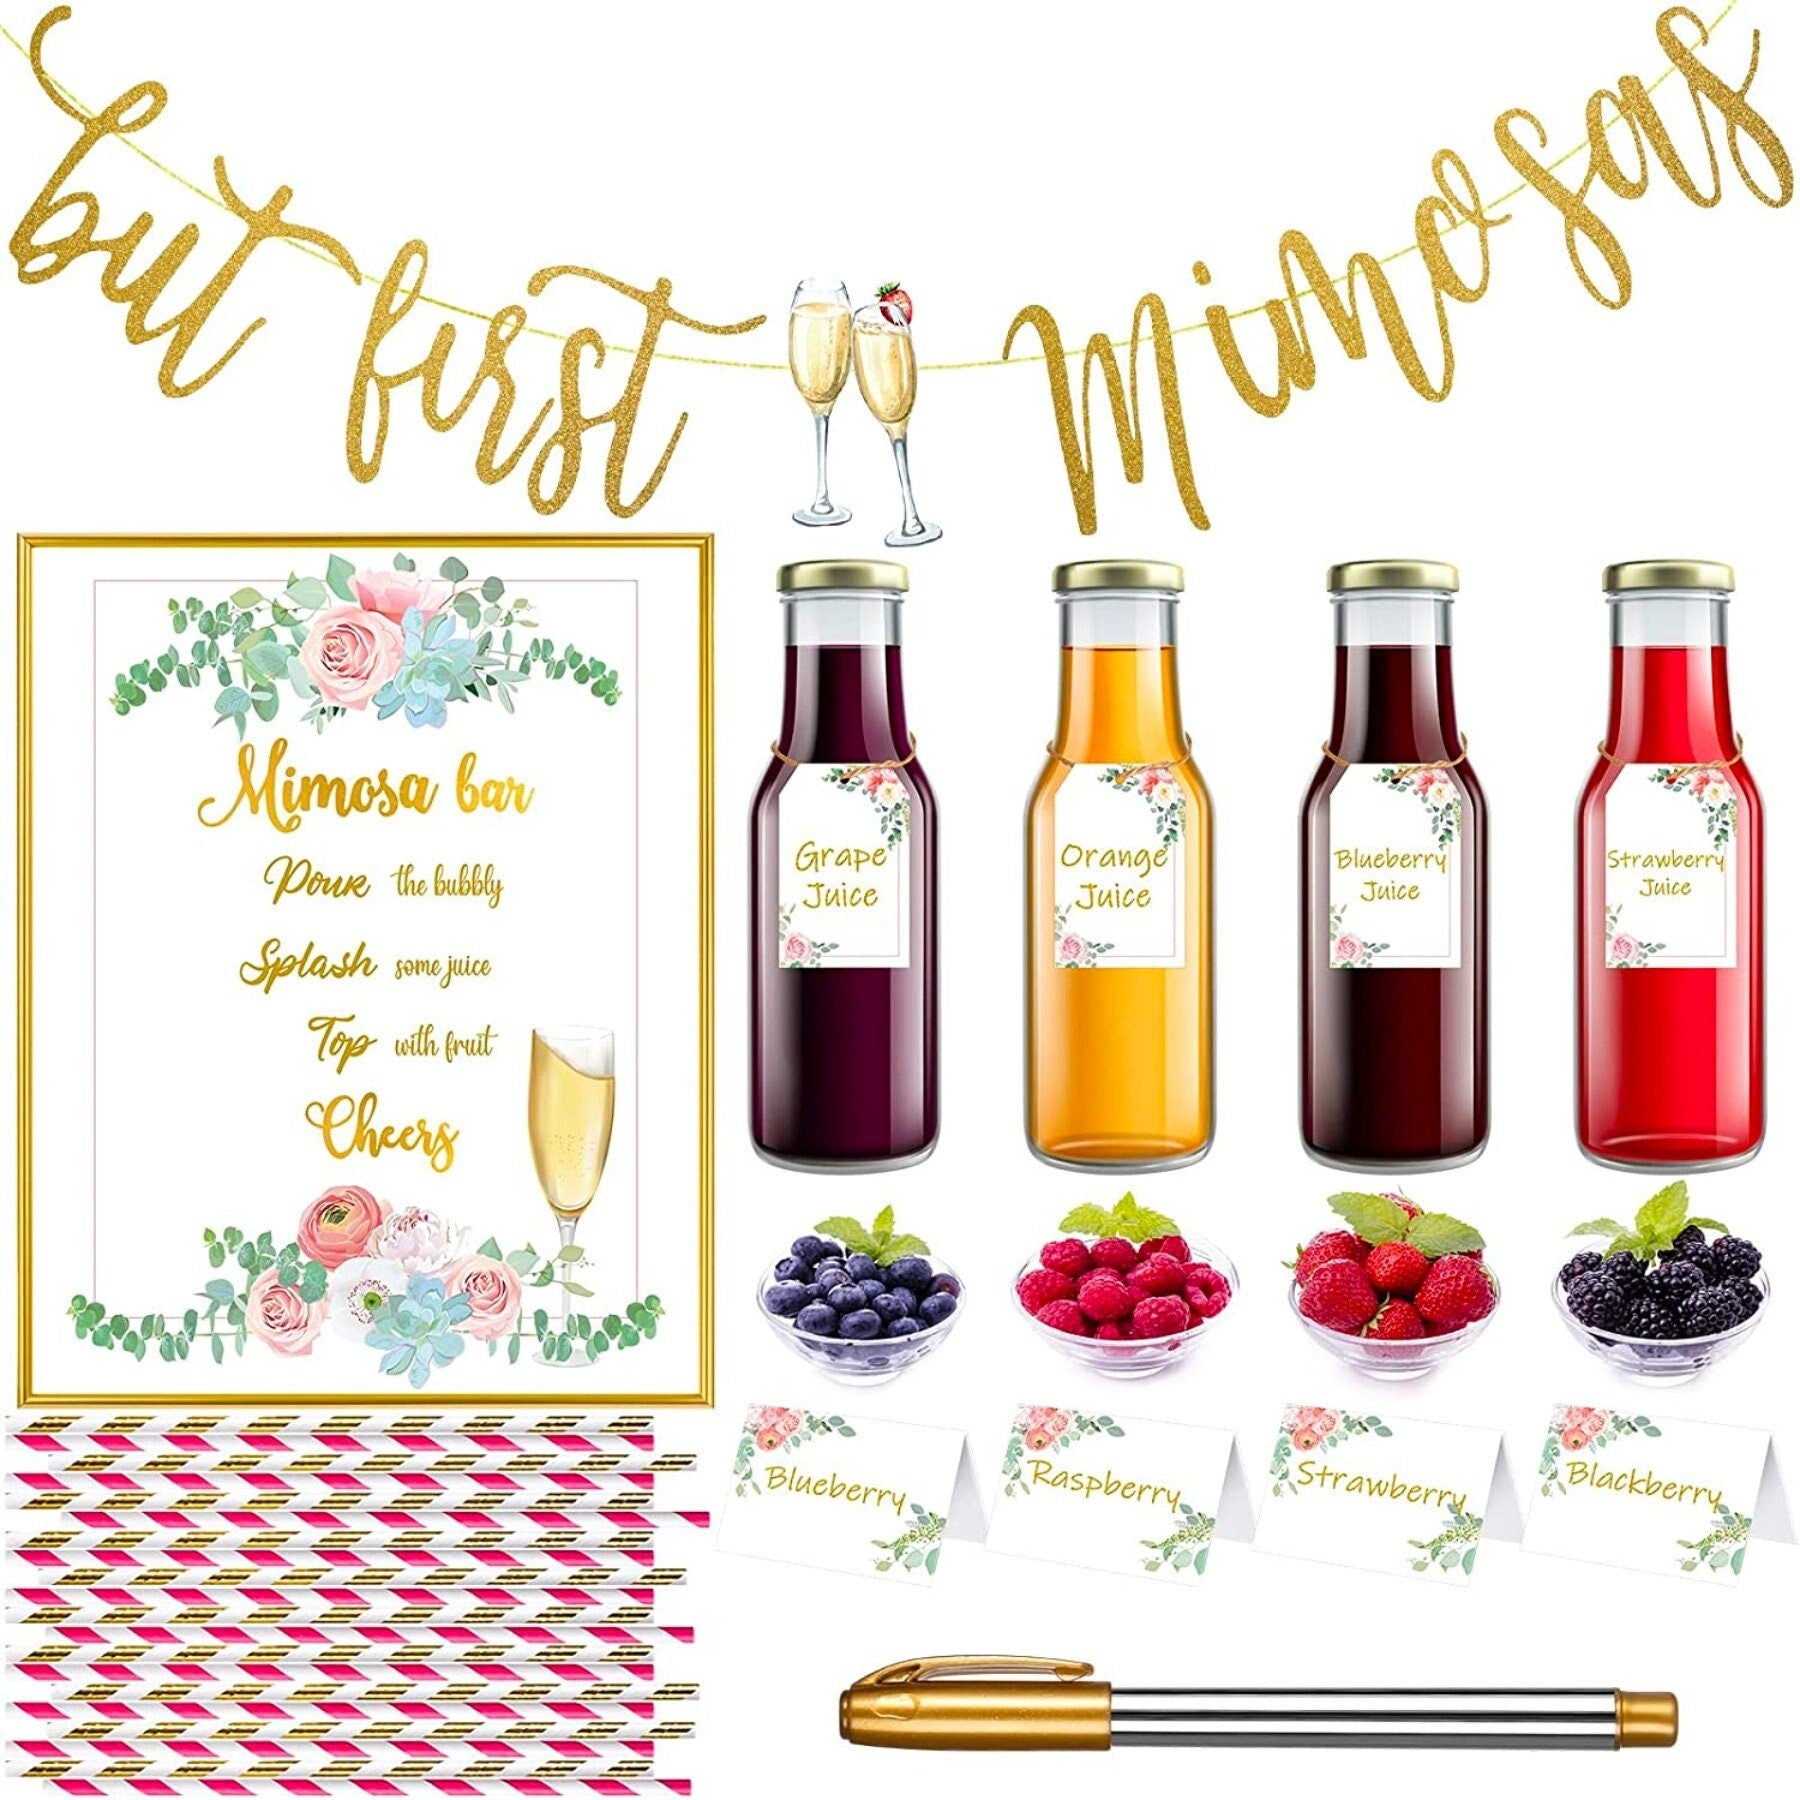 Mimosa Bar Supplies Kit - Watercolor Pink Mimosa Bar Sign - Elegant Gold  Foil Table Place Cards - Bridal Shower, Birthday Party, Bubbly Bar